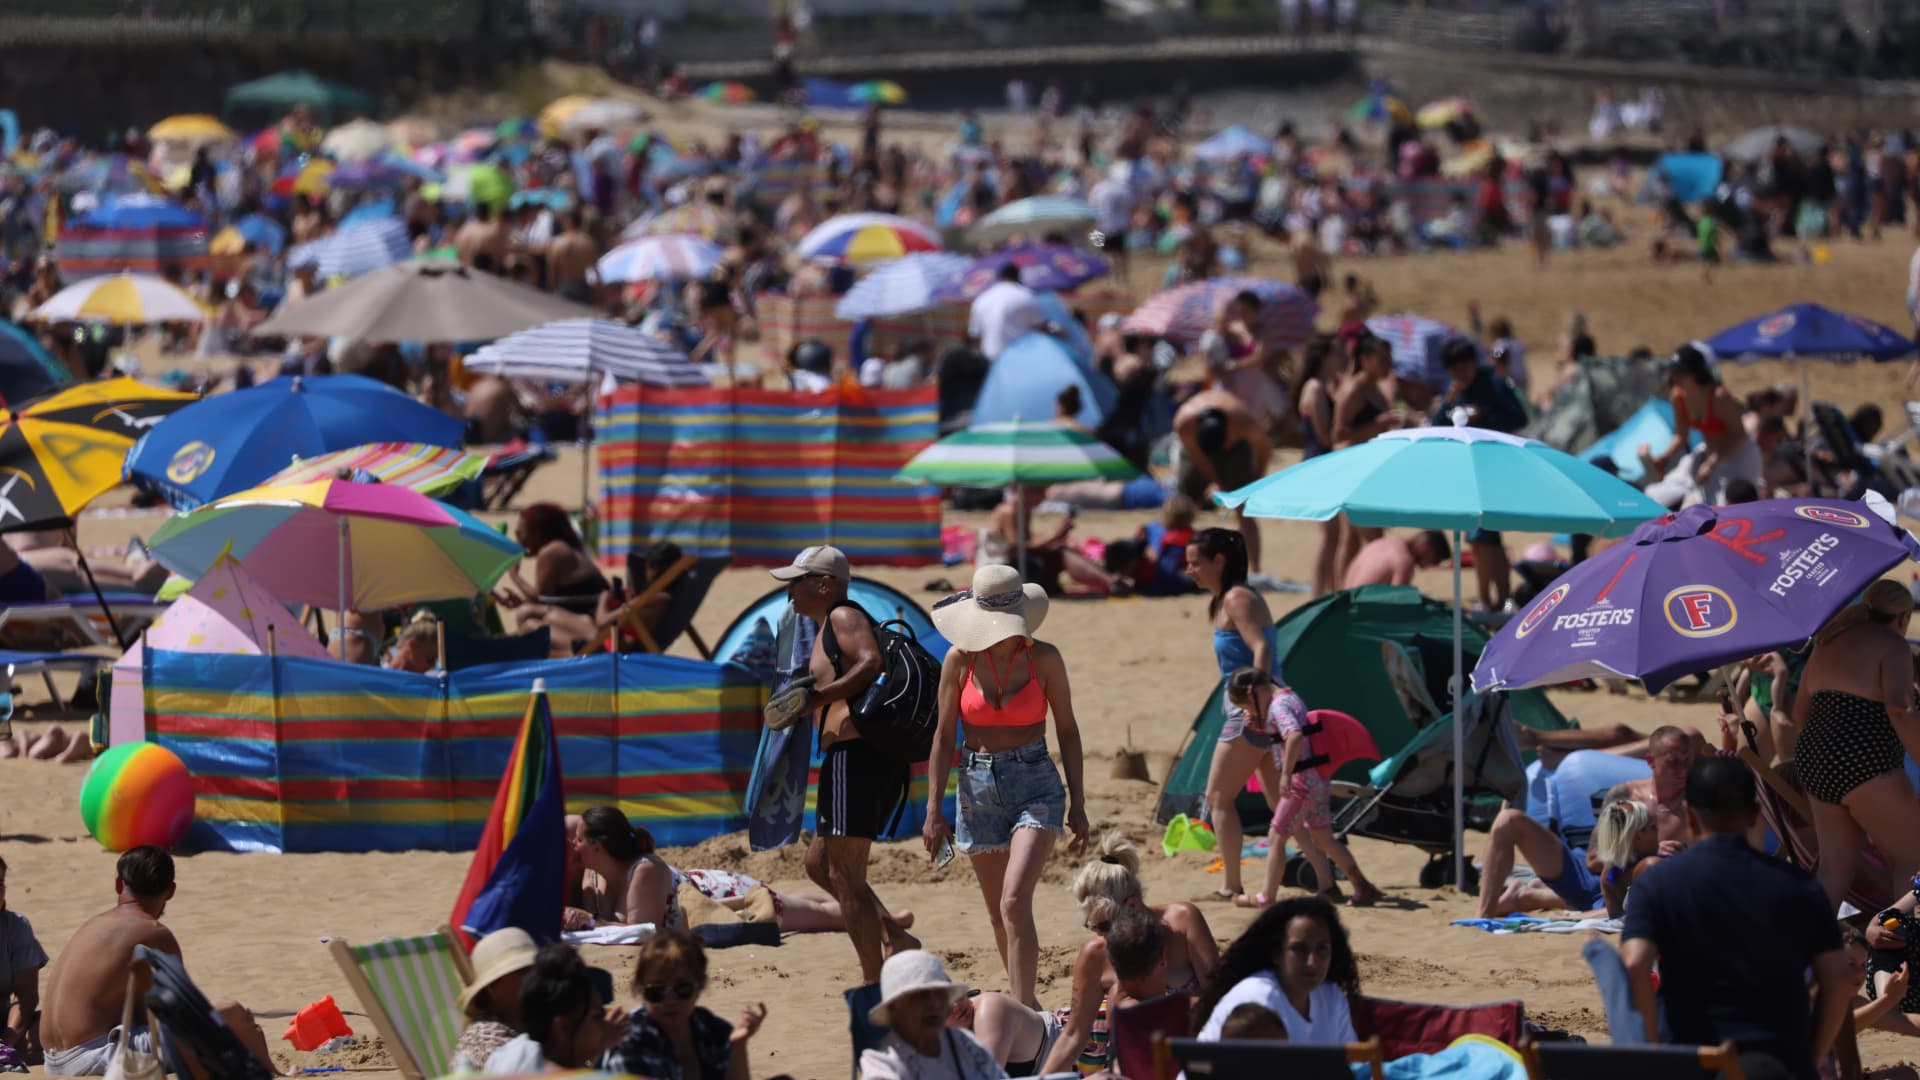 UK braces for hottest day on record with highs of 106 degrees Fahrenheit expecte..